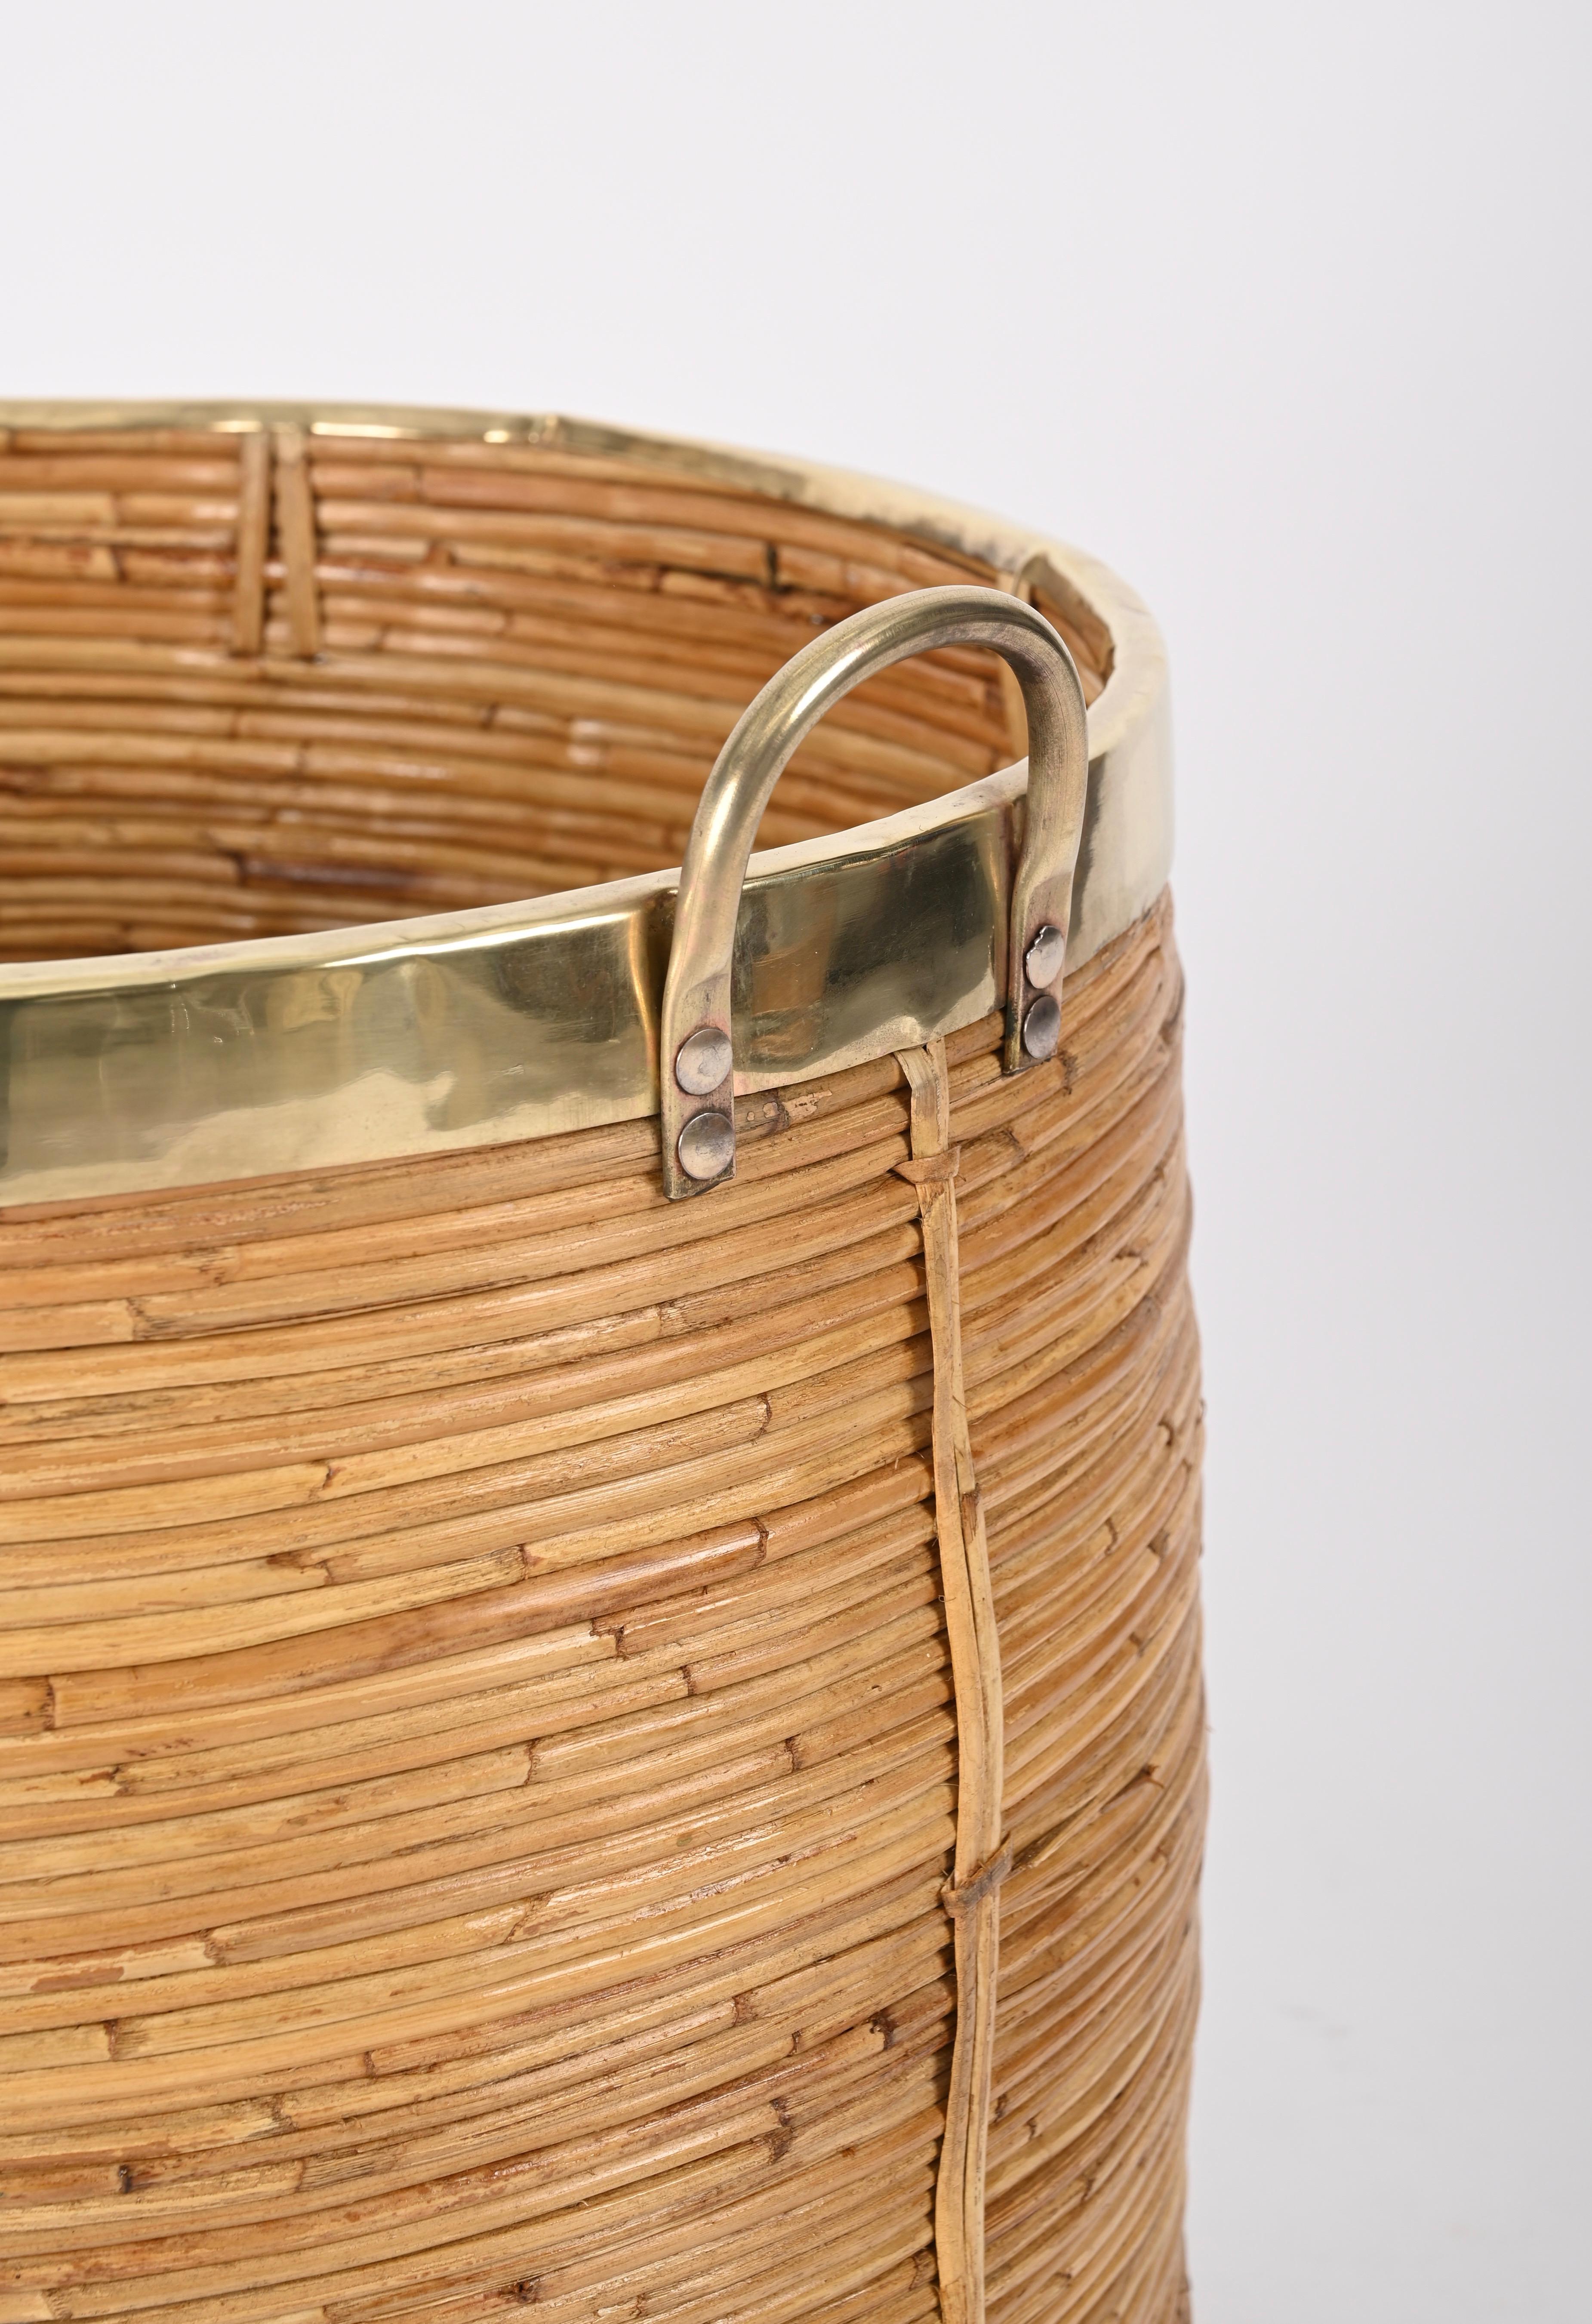 Midcentury Curved Rattan, Brass and Wicker Basket, Vivai del Sud, Italy 1970s In Good Condition For Sale In Roma, IT